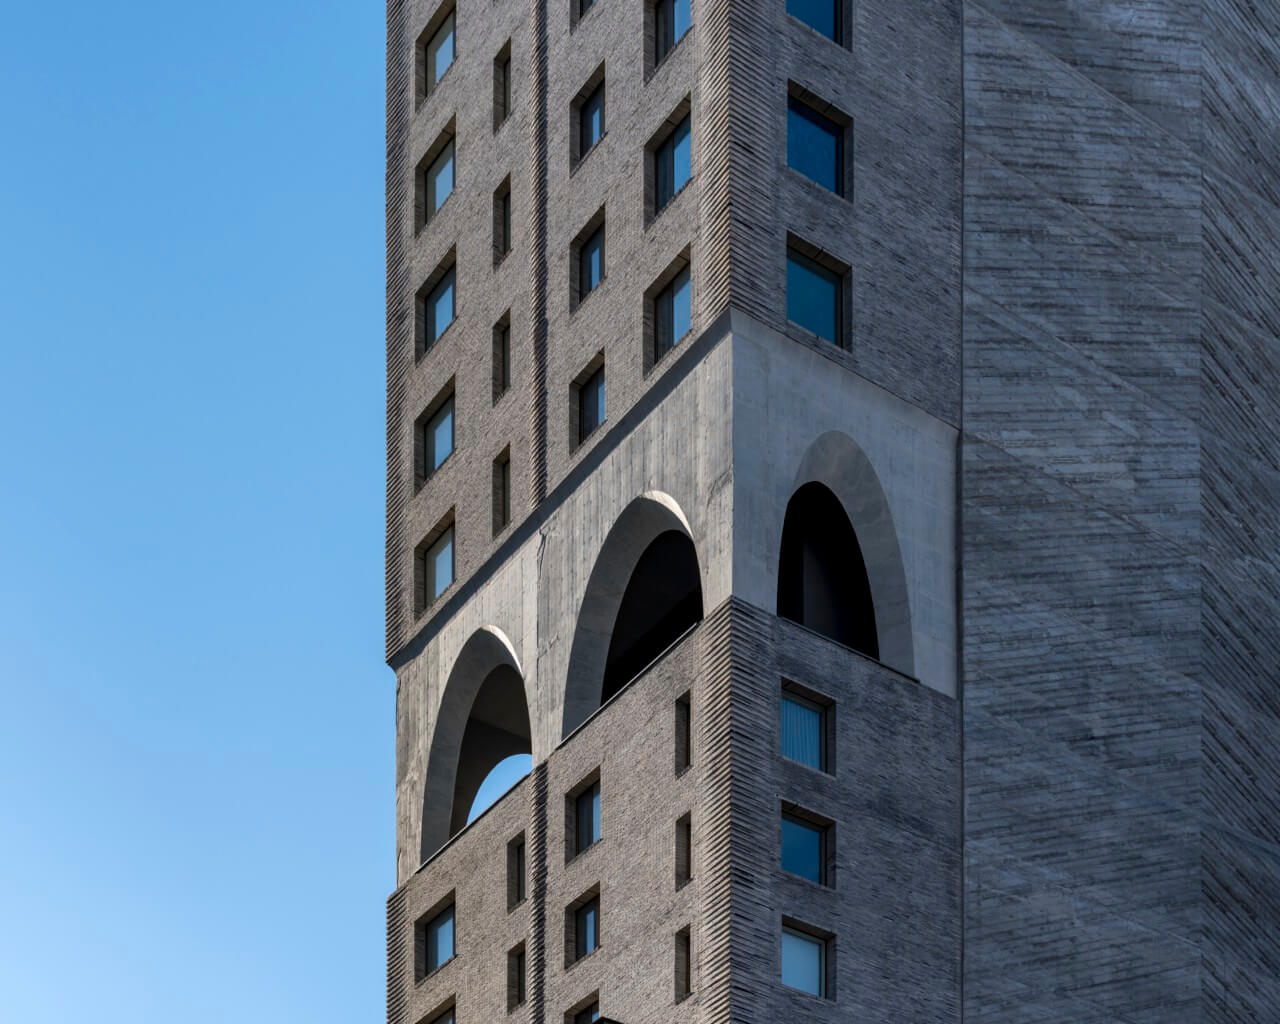 a corner shot showing the two story poured concrete arches at the mechanical, or "skyview", level and the north herringbone concrete wall